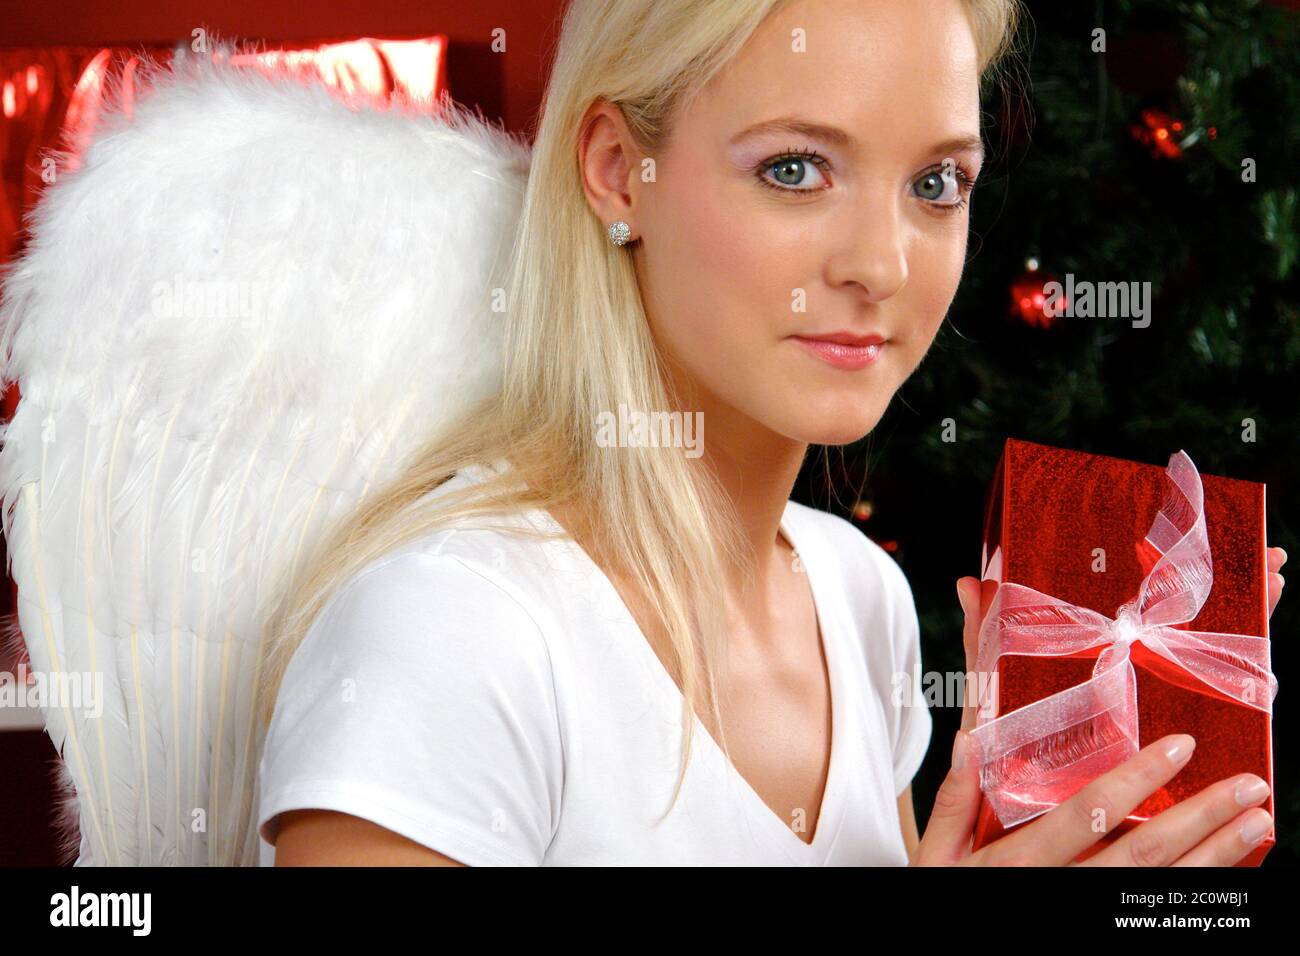 woman holiday heaven paradise wing angel angels party celebration gift Stock Photo